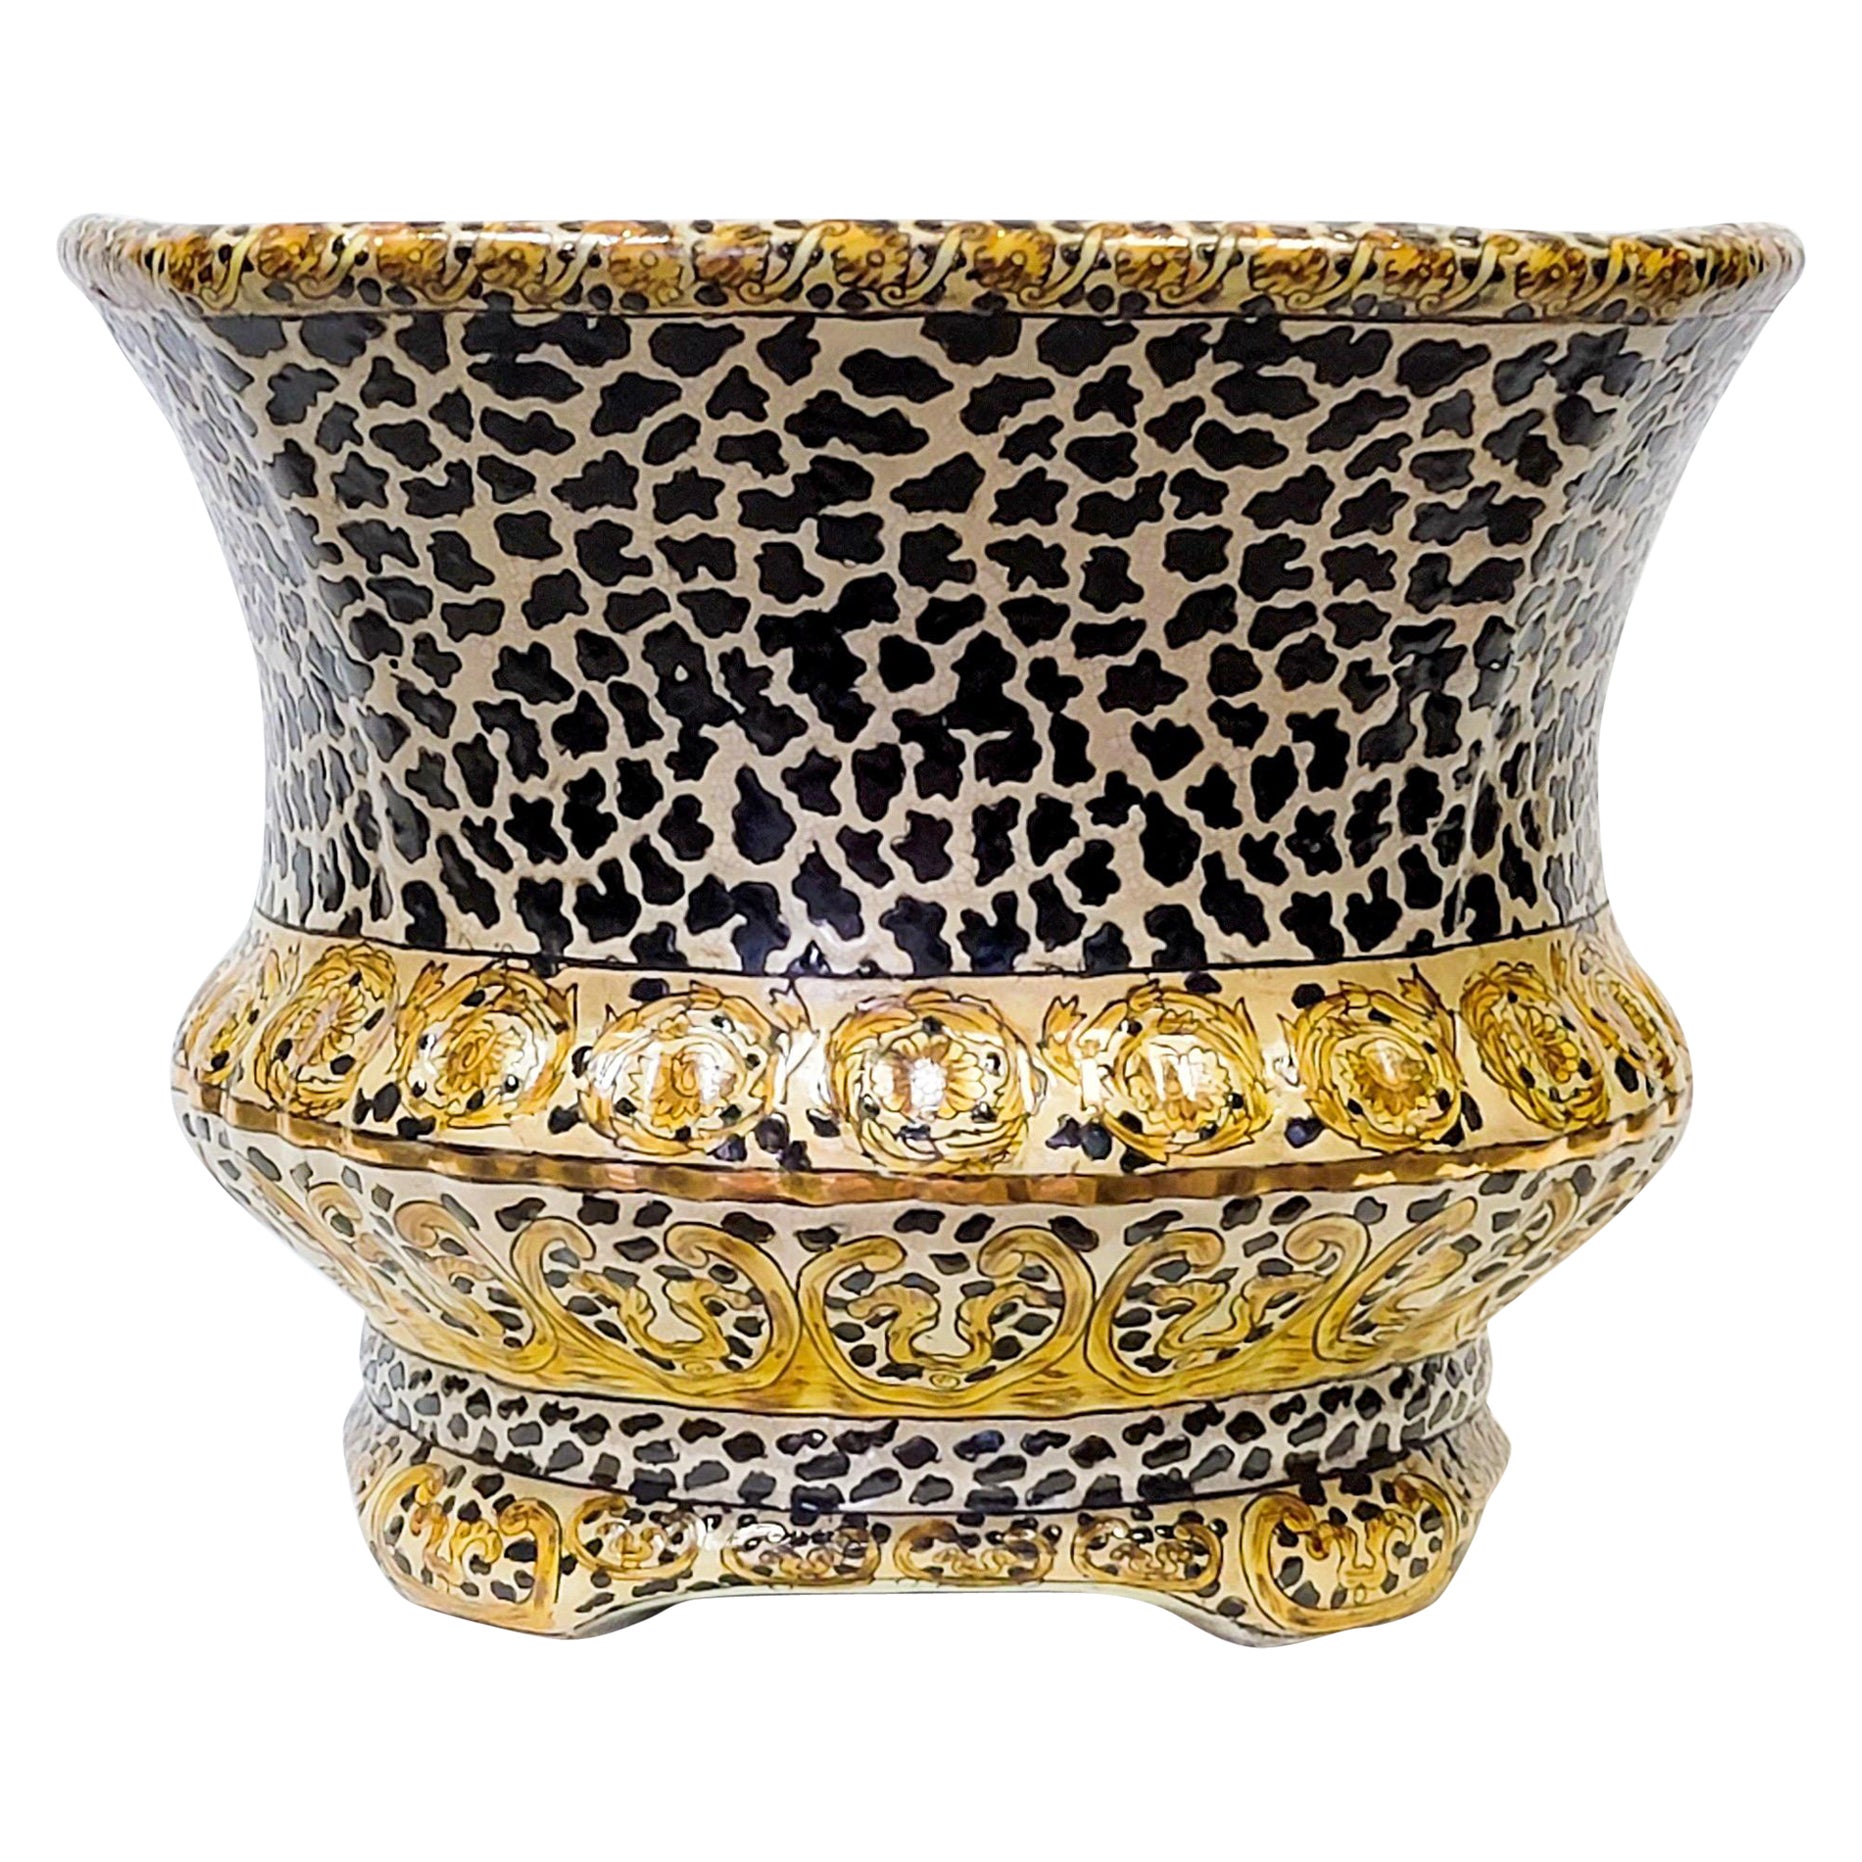 Late 20th-C. Large Chinese Export Style Leopard Motif Planter / Cachepot / Vase